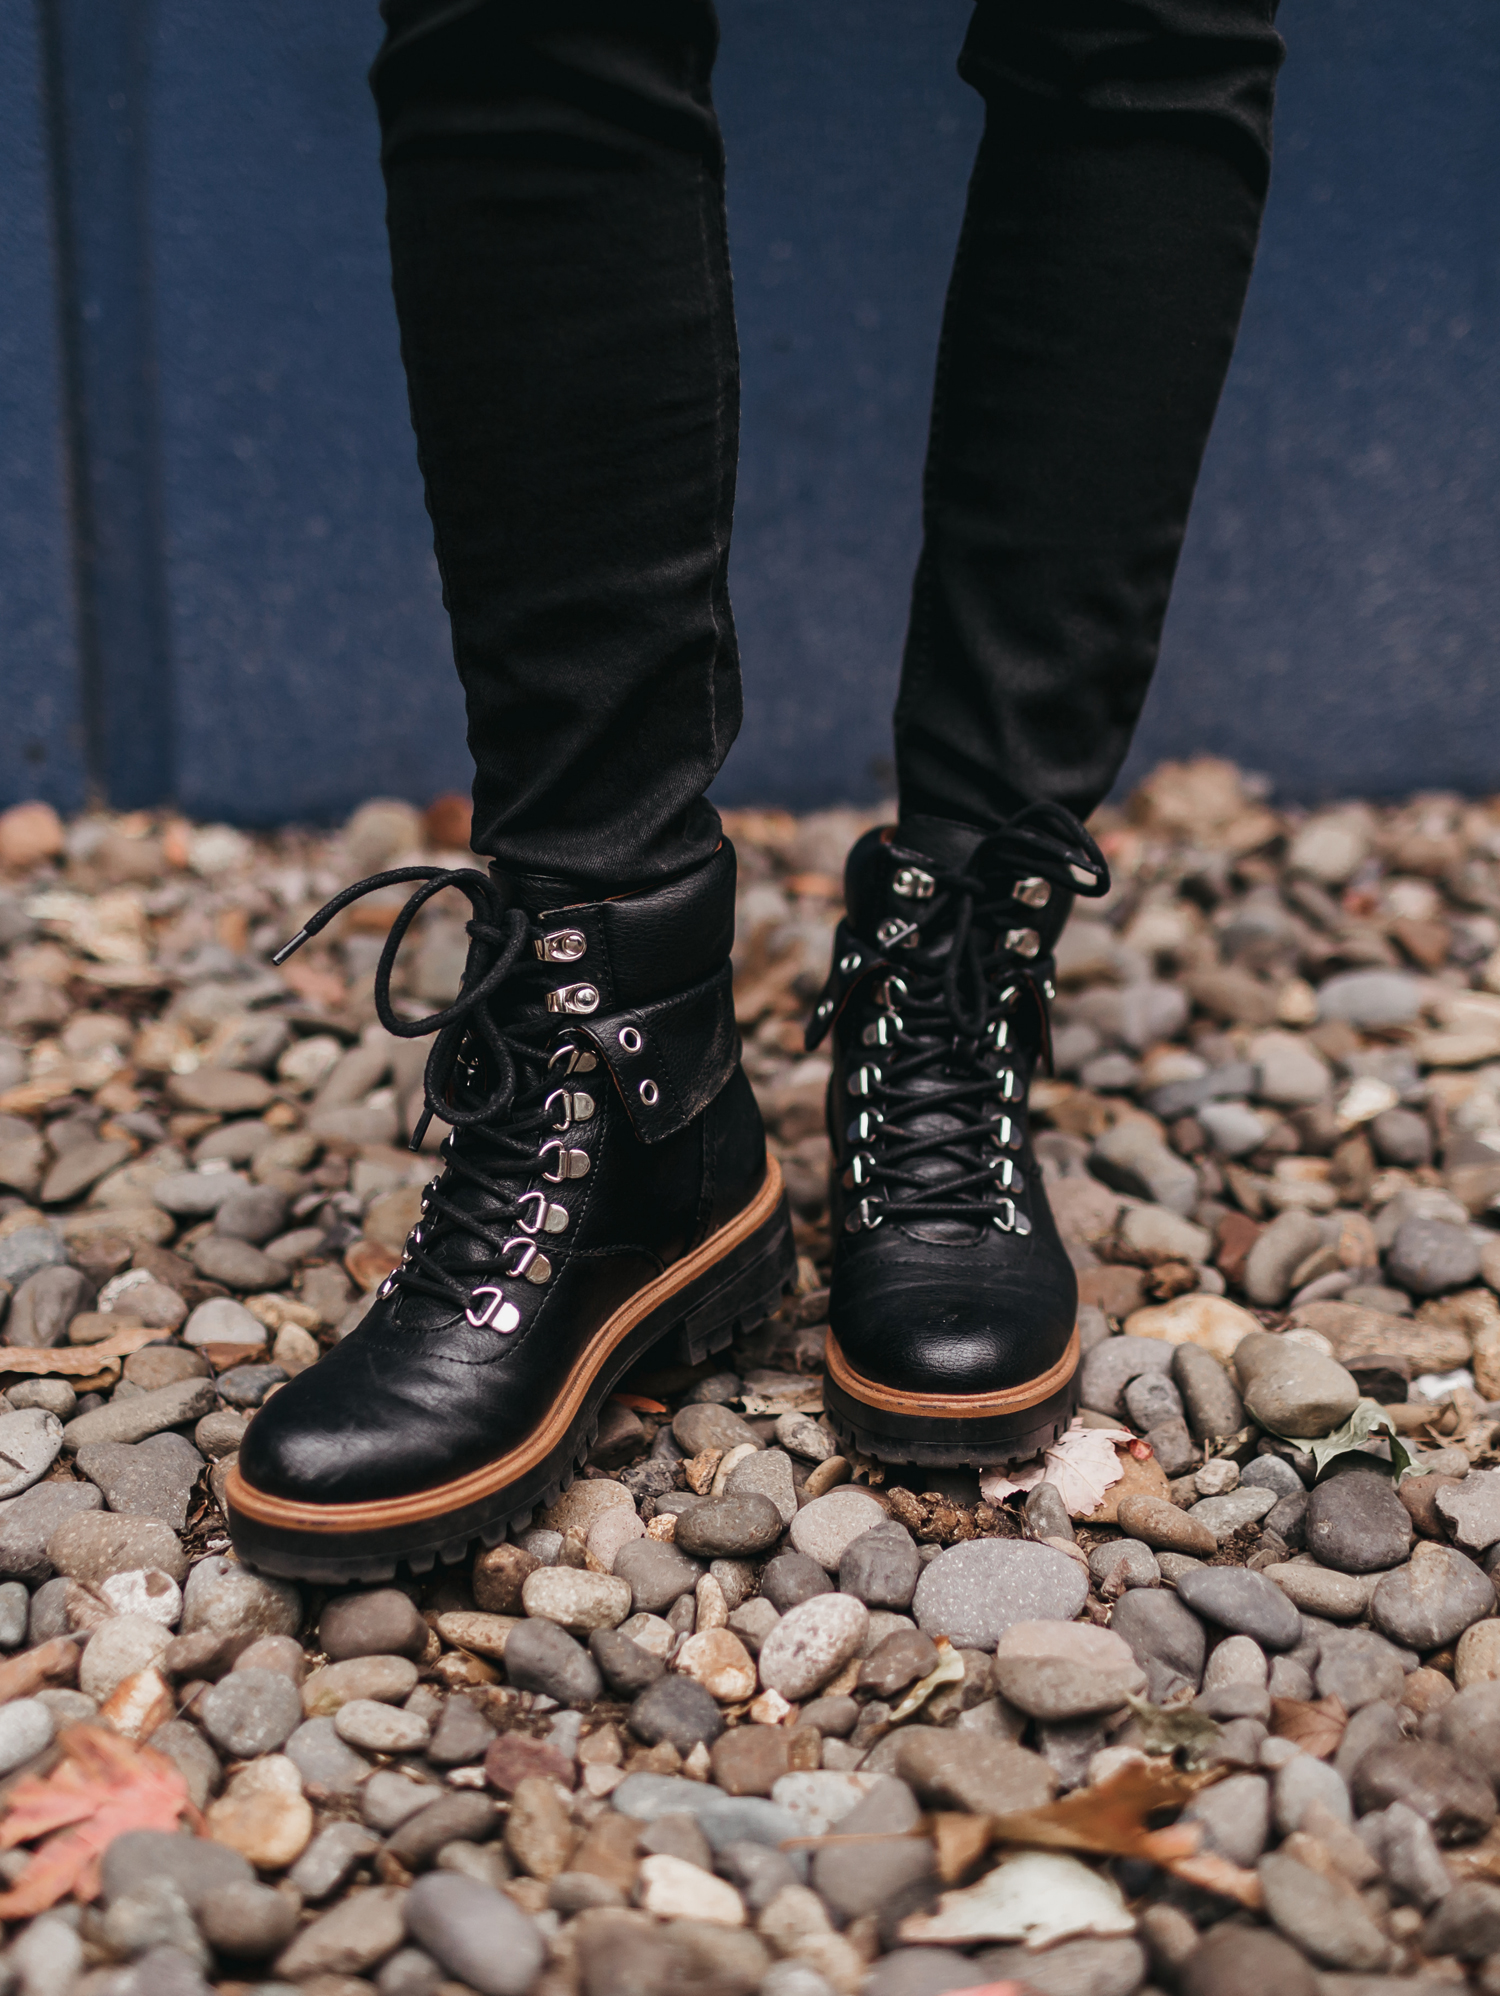 The Best Combat Boots for Wet Winter Weather